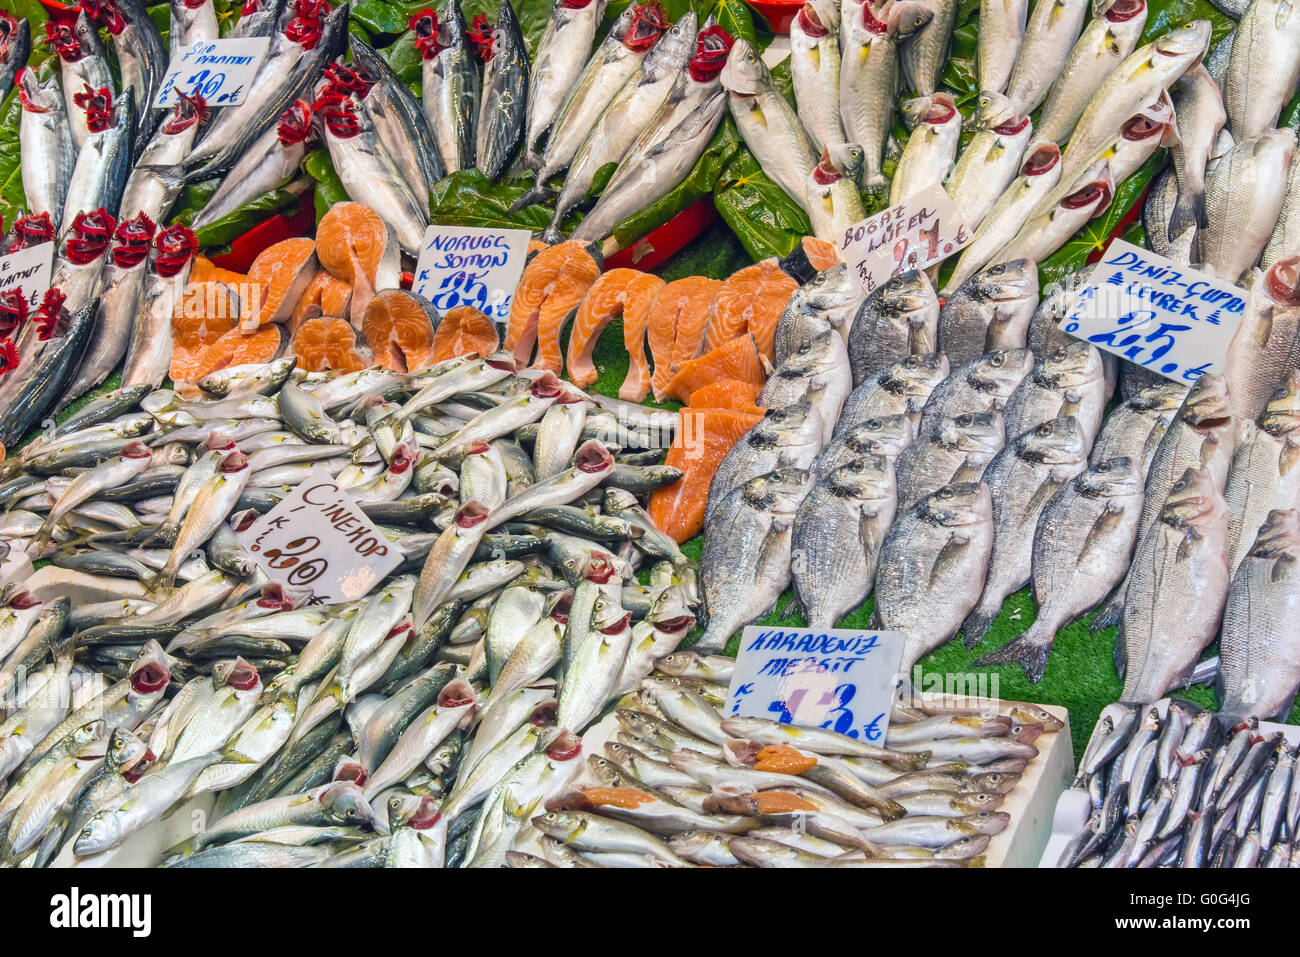 Great choice of fish at a market in Istanbul, Turkey Stock Photo